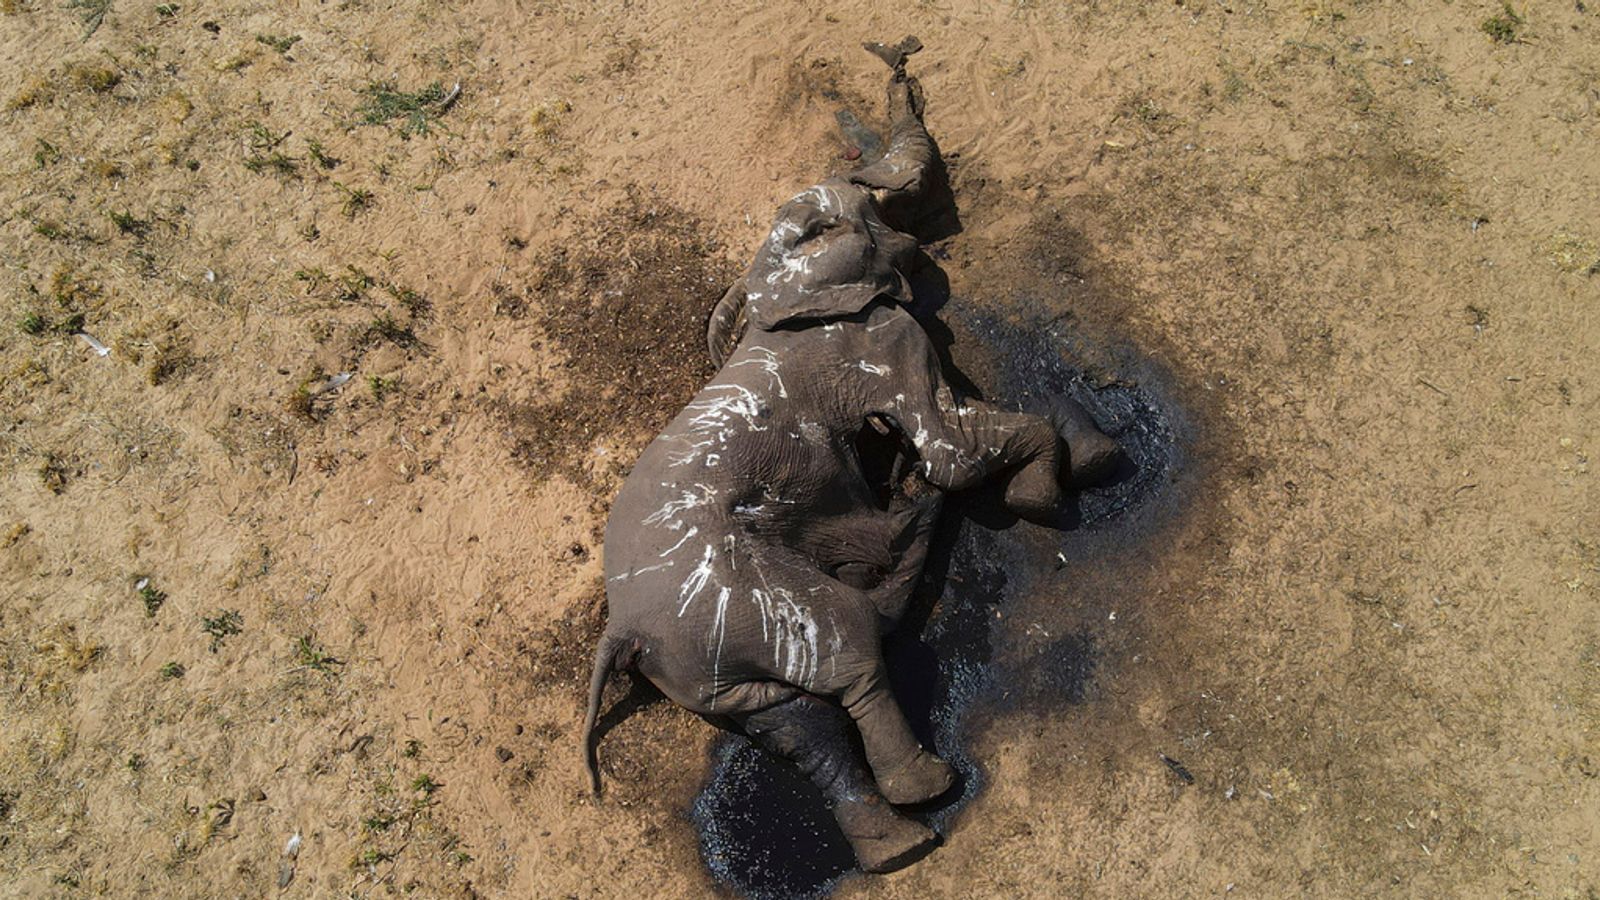 at least 100 elephants die as drought hits zimbabwe's largest national park